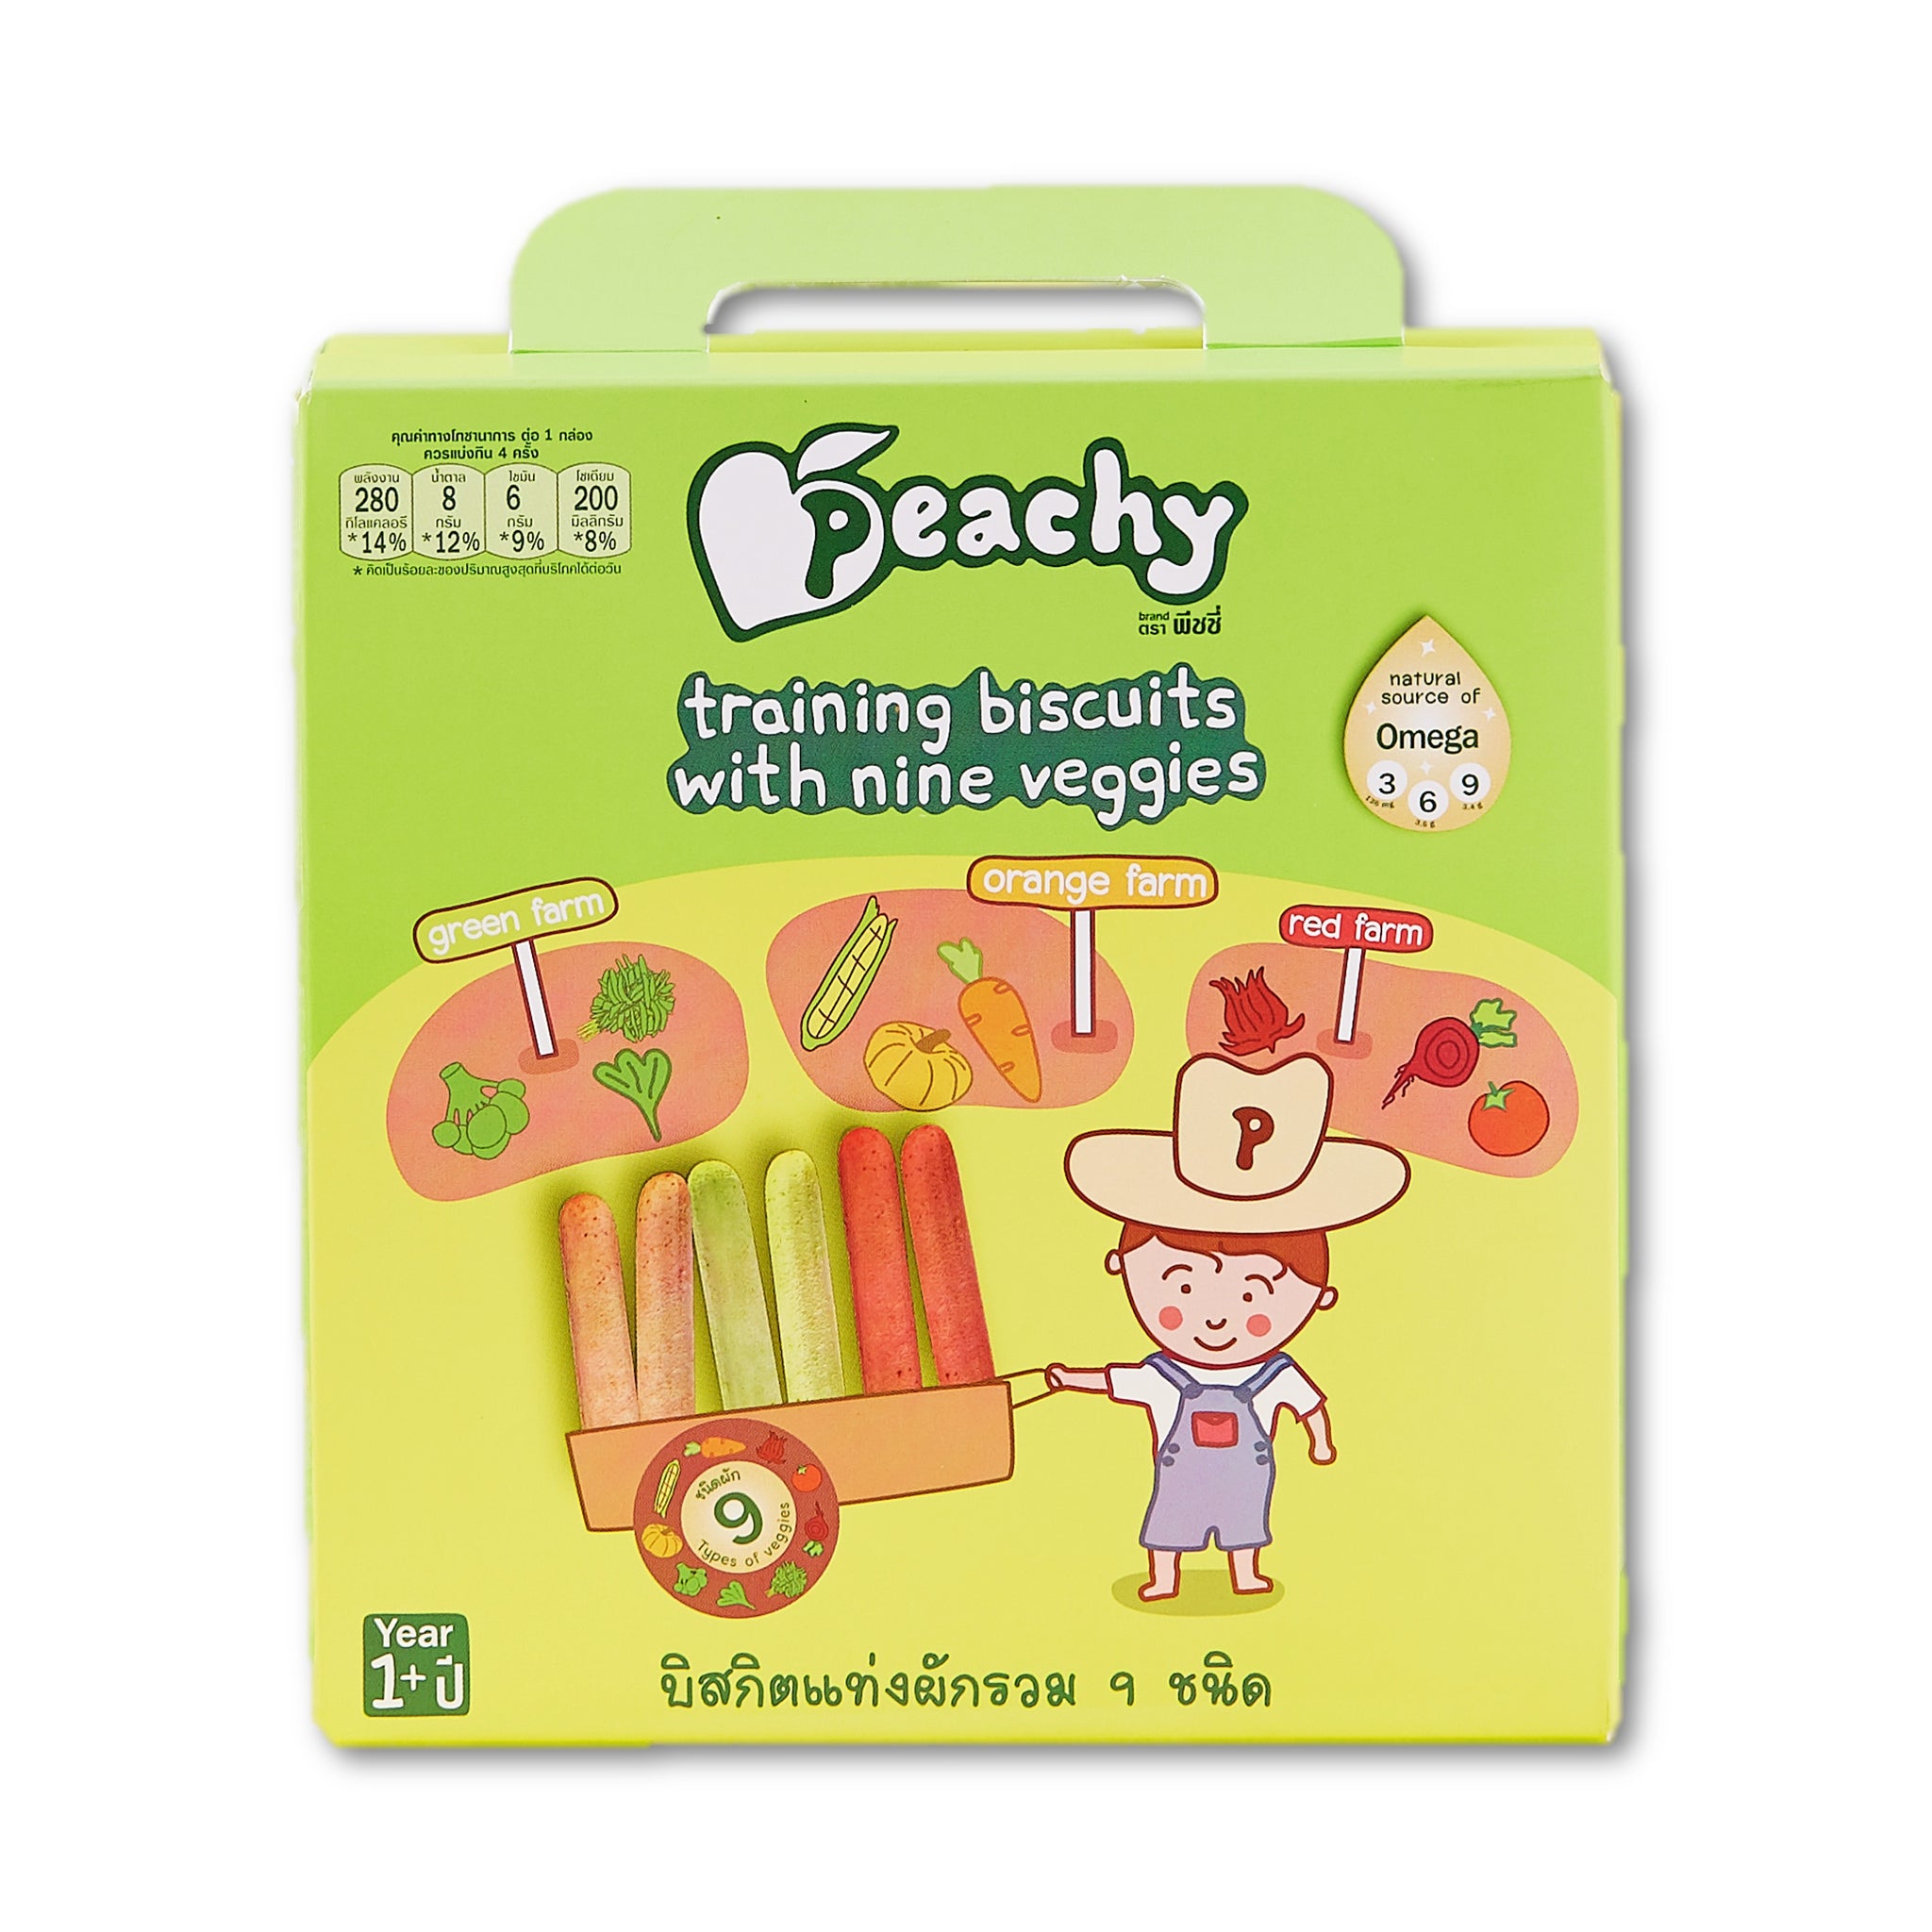 Peachy Biscuits - Training Biscuits with Nine Veggies